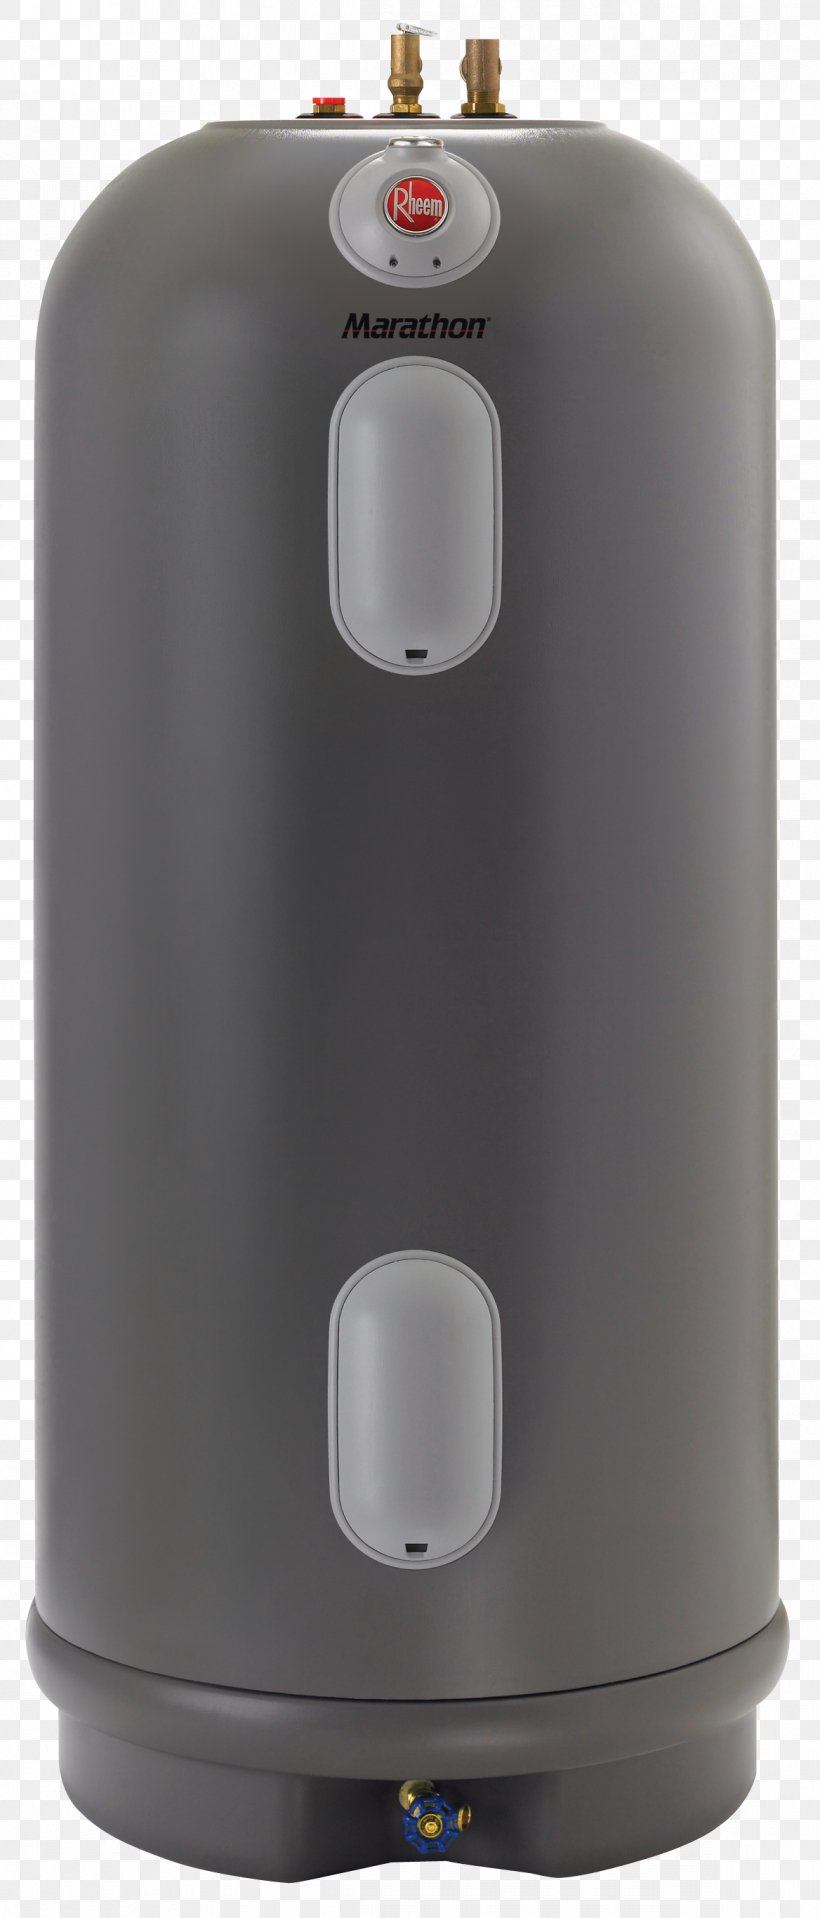 Tankless Water Heating Marathon Water Heater Natural Gas Electric Heating, PNG, 1168x2732px, Water Heating, Boiler, Cylinder, Electric Heating, Electricity Download Free